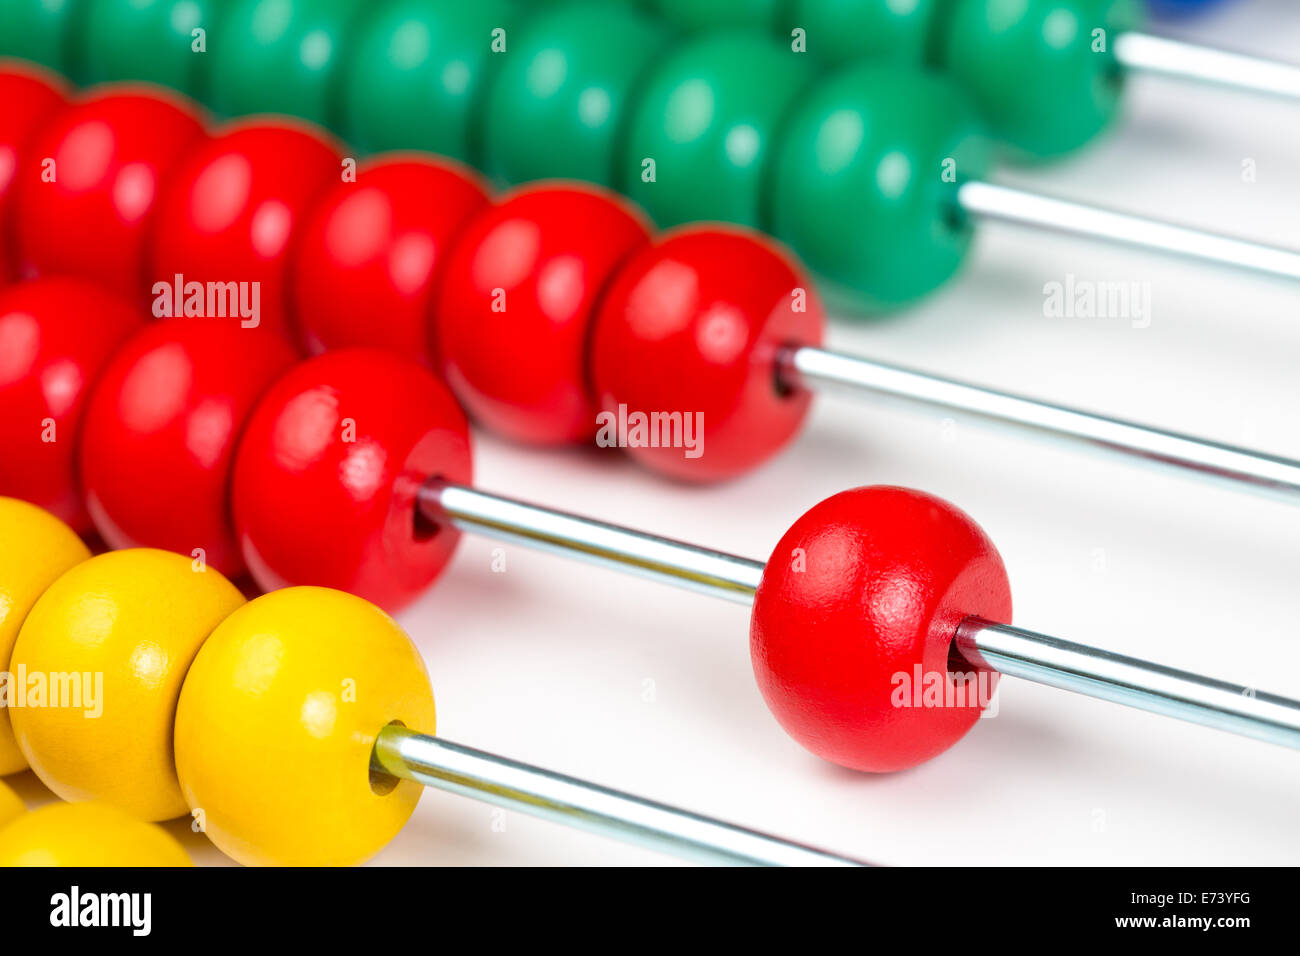 Colorful abacus toy Stock Photo